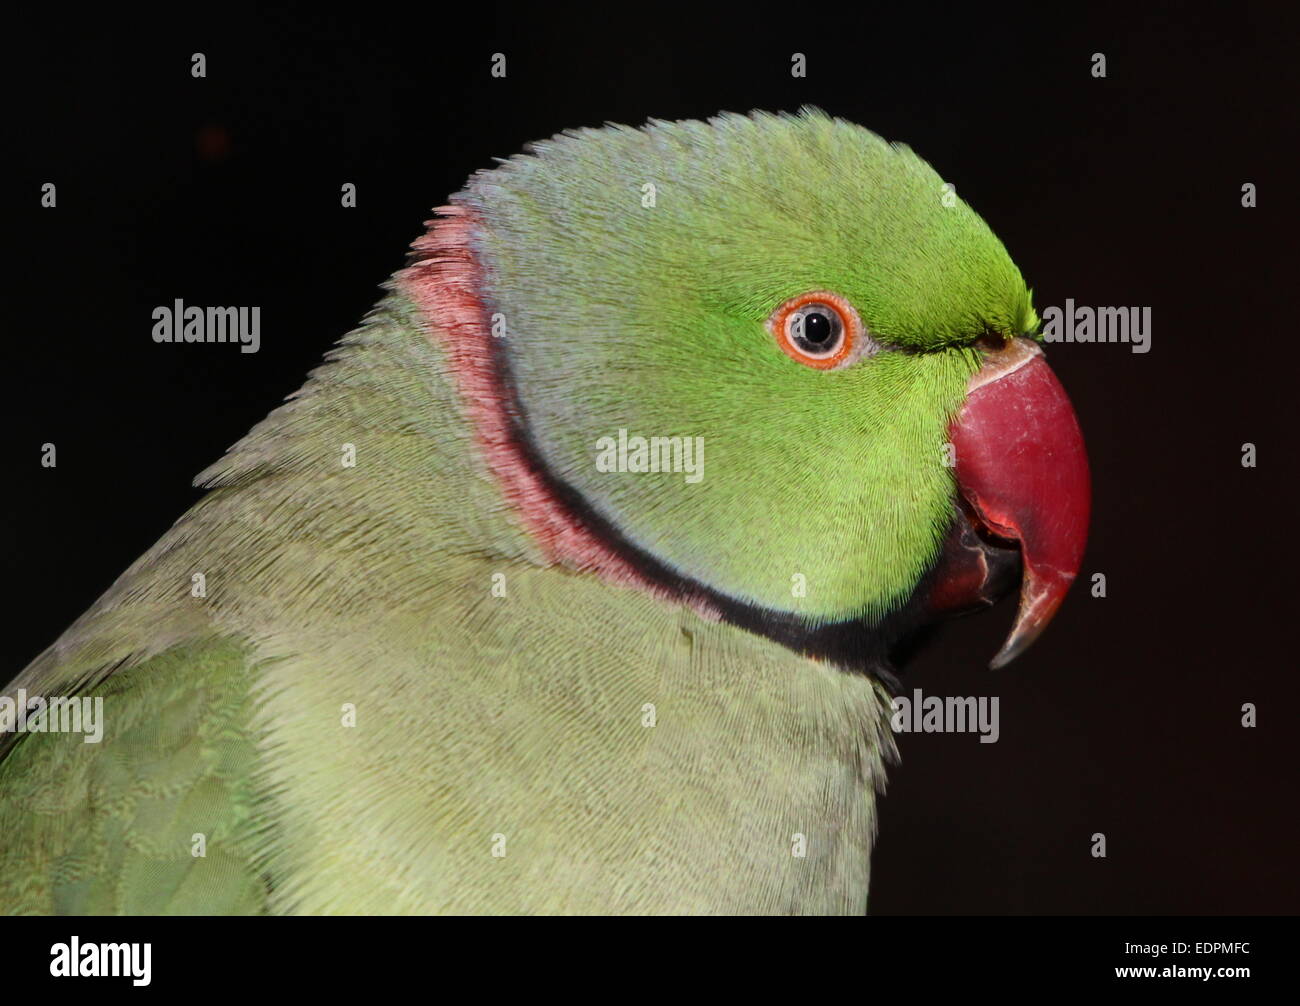 Detailed close-up of  a male Rose-ringed or  ring-necked Parakeet (Psittacula krameri) in profile on a black background Stock Photo